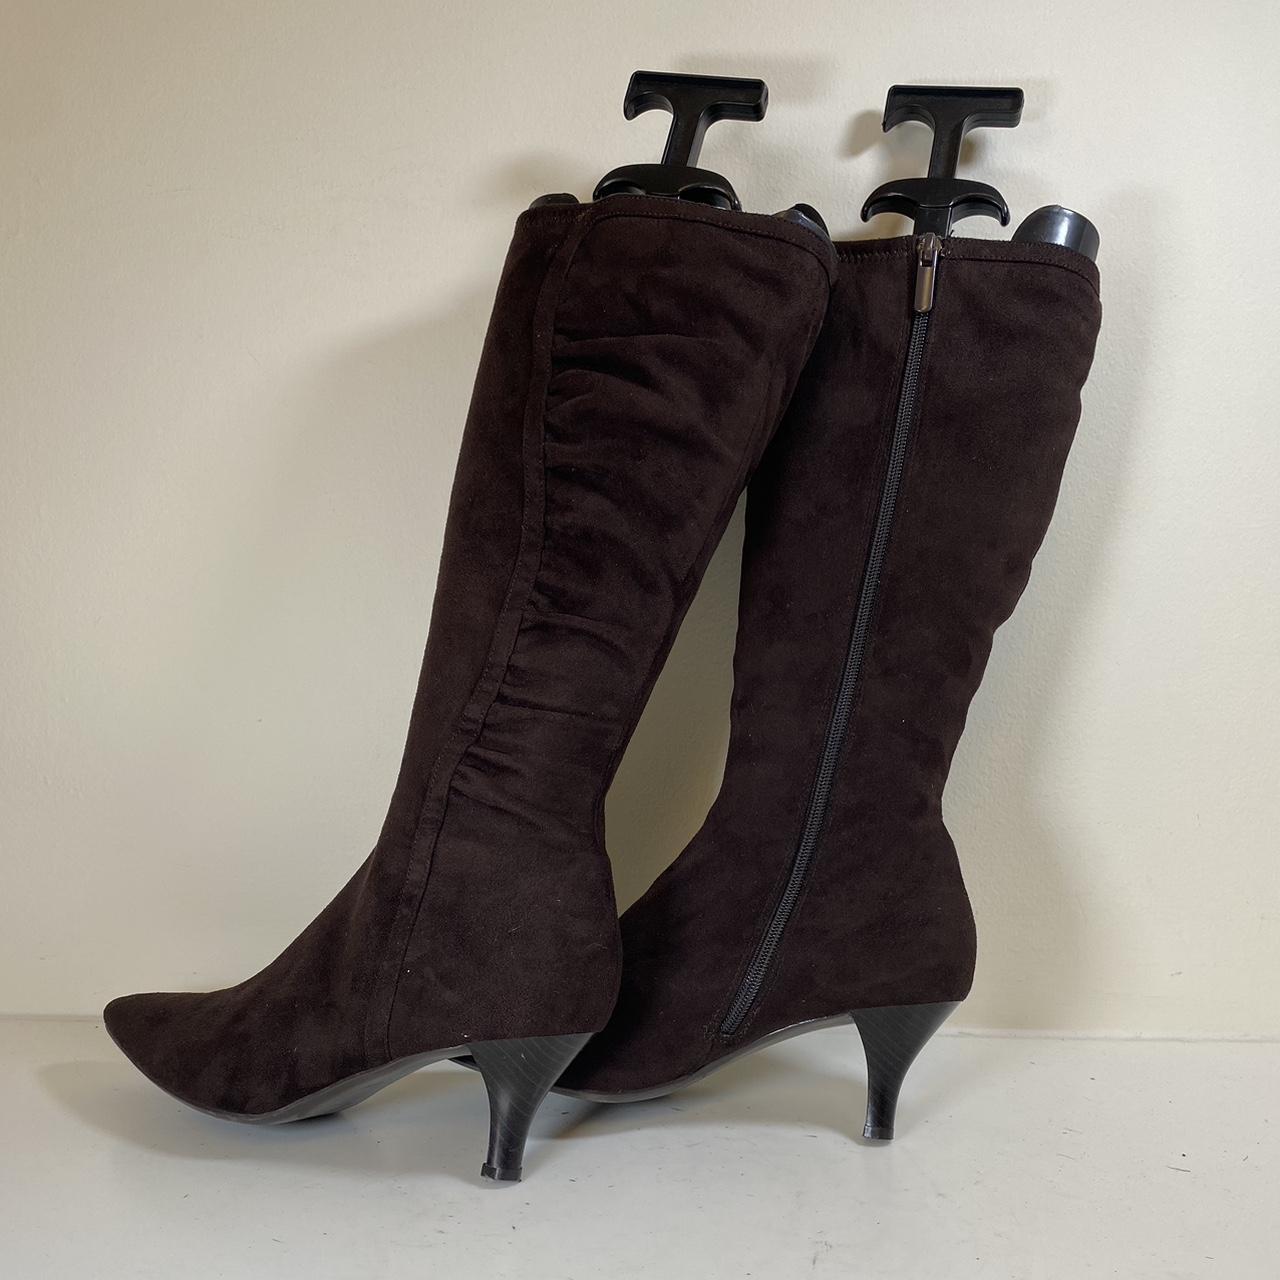 Impo Women's Brown and Black Boots (6)